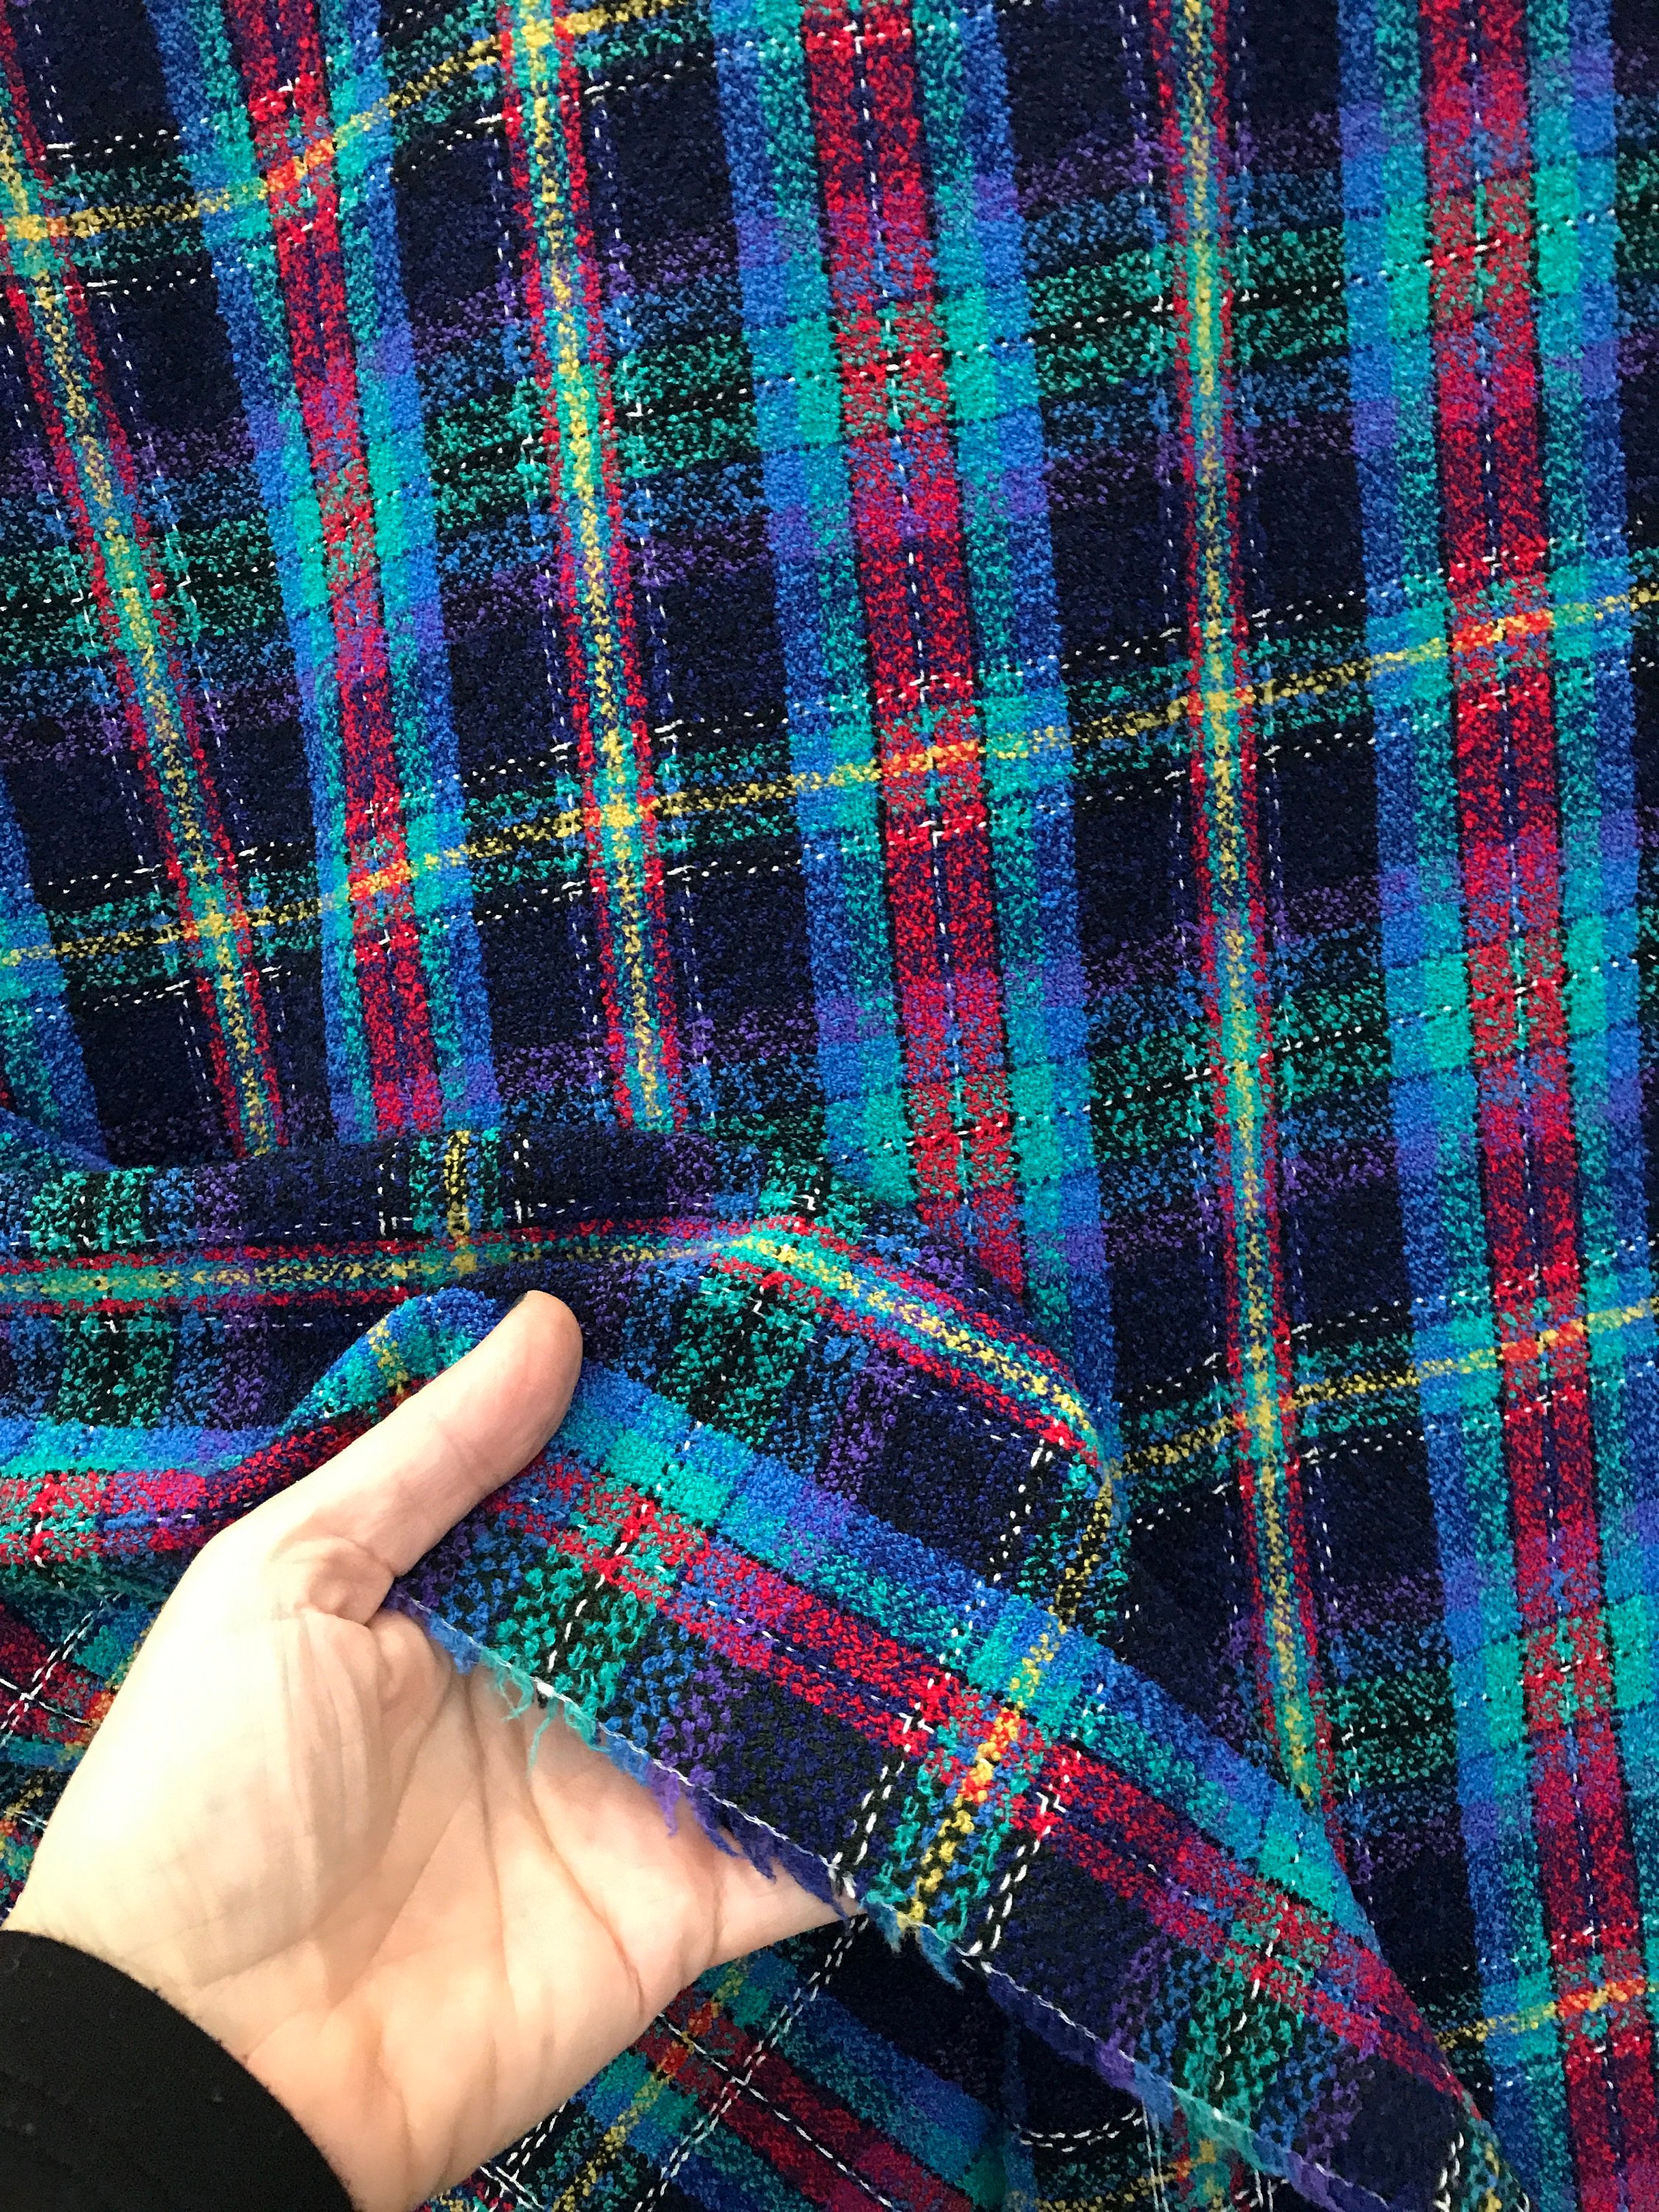 tweed boucle check fabric Red blue pure wool check fabric kilt plaid skirt bustle sewing dressmaking shawl stole scarf 150cm 60"